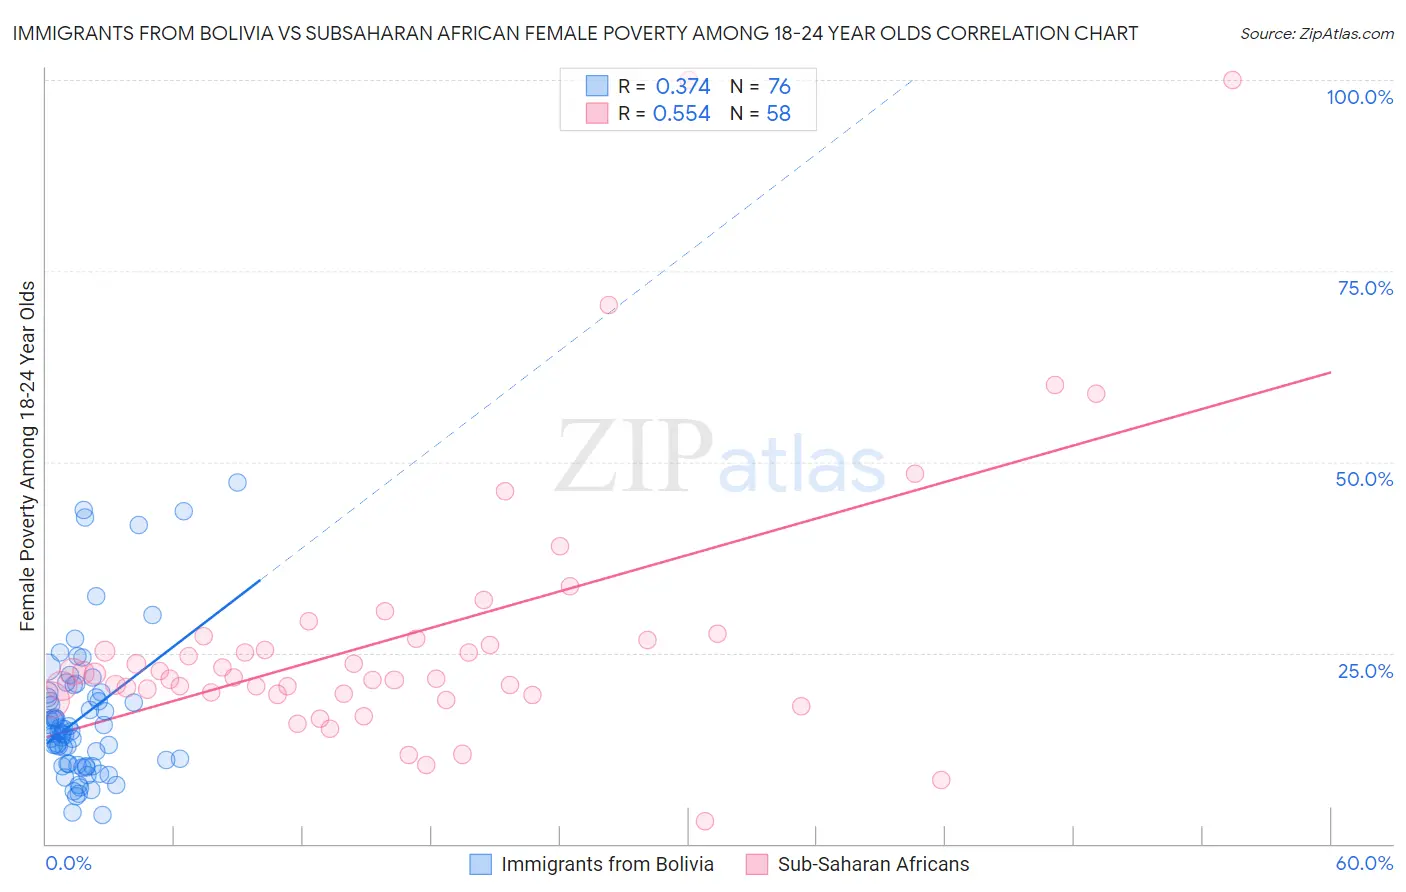 Immigrants from Bolivia vs Subsaharan African Female Poverty Among 18-24 Year Olds